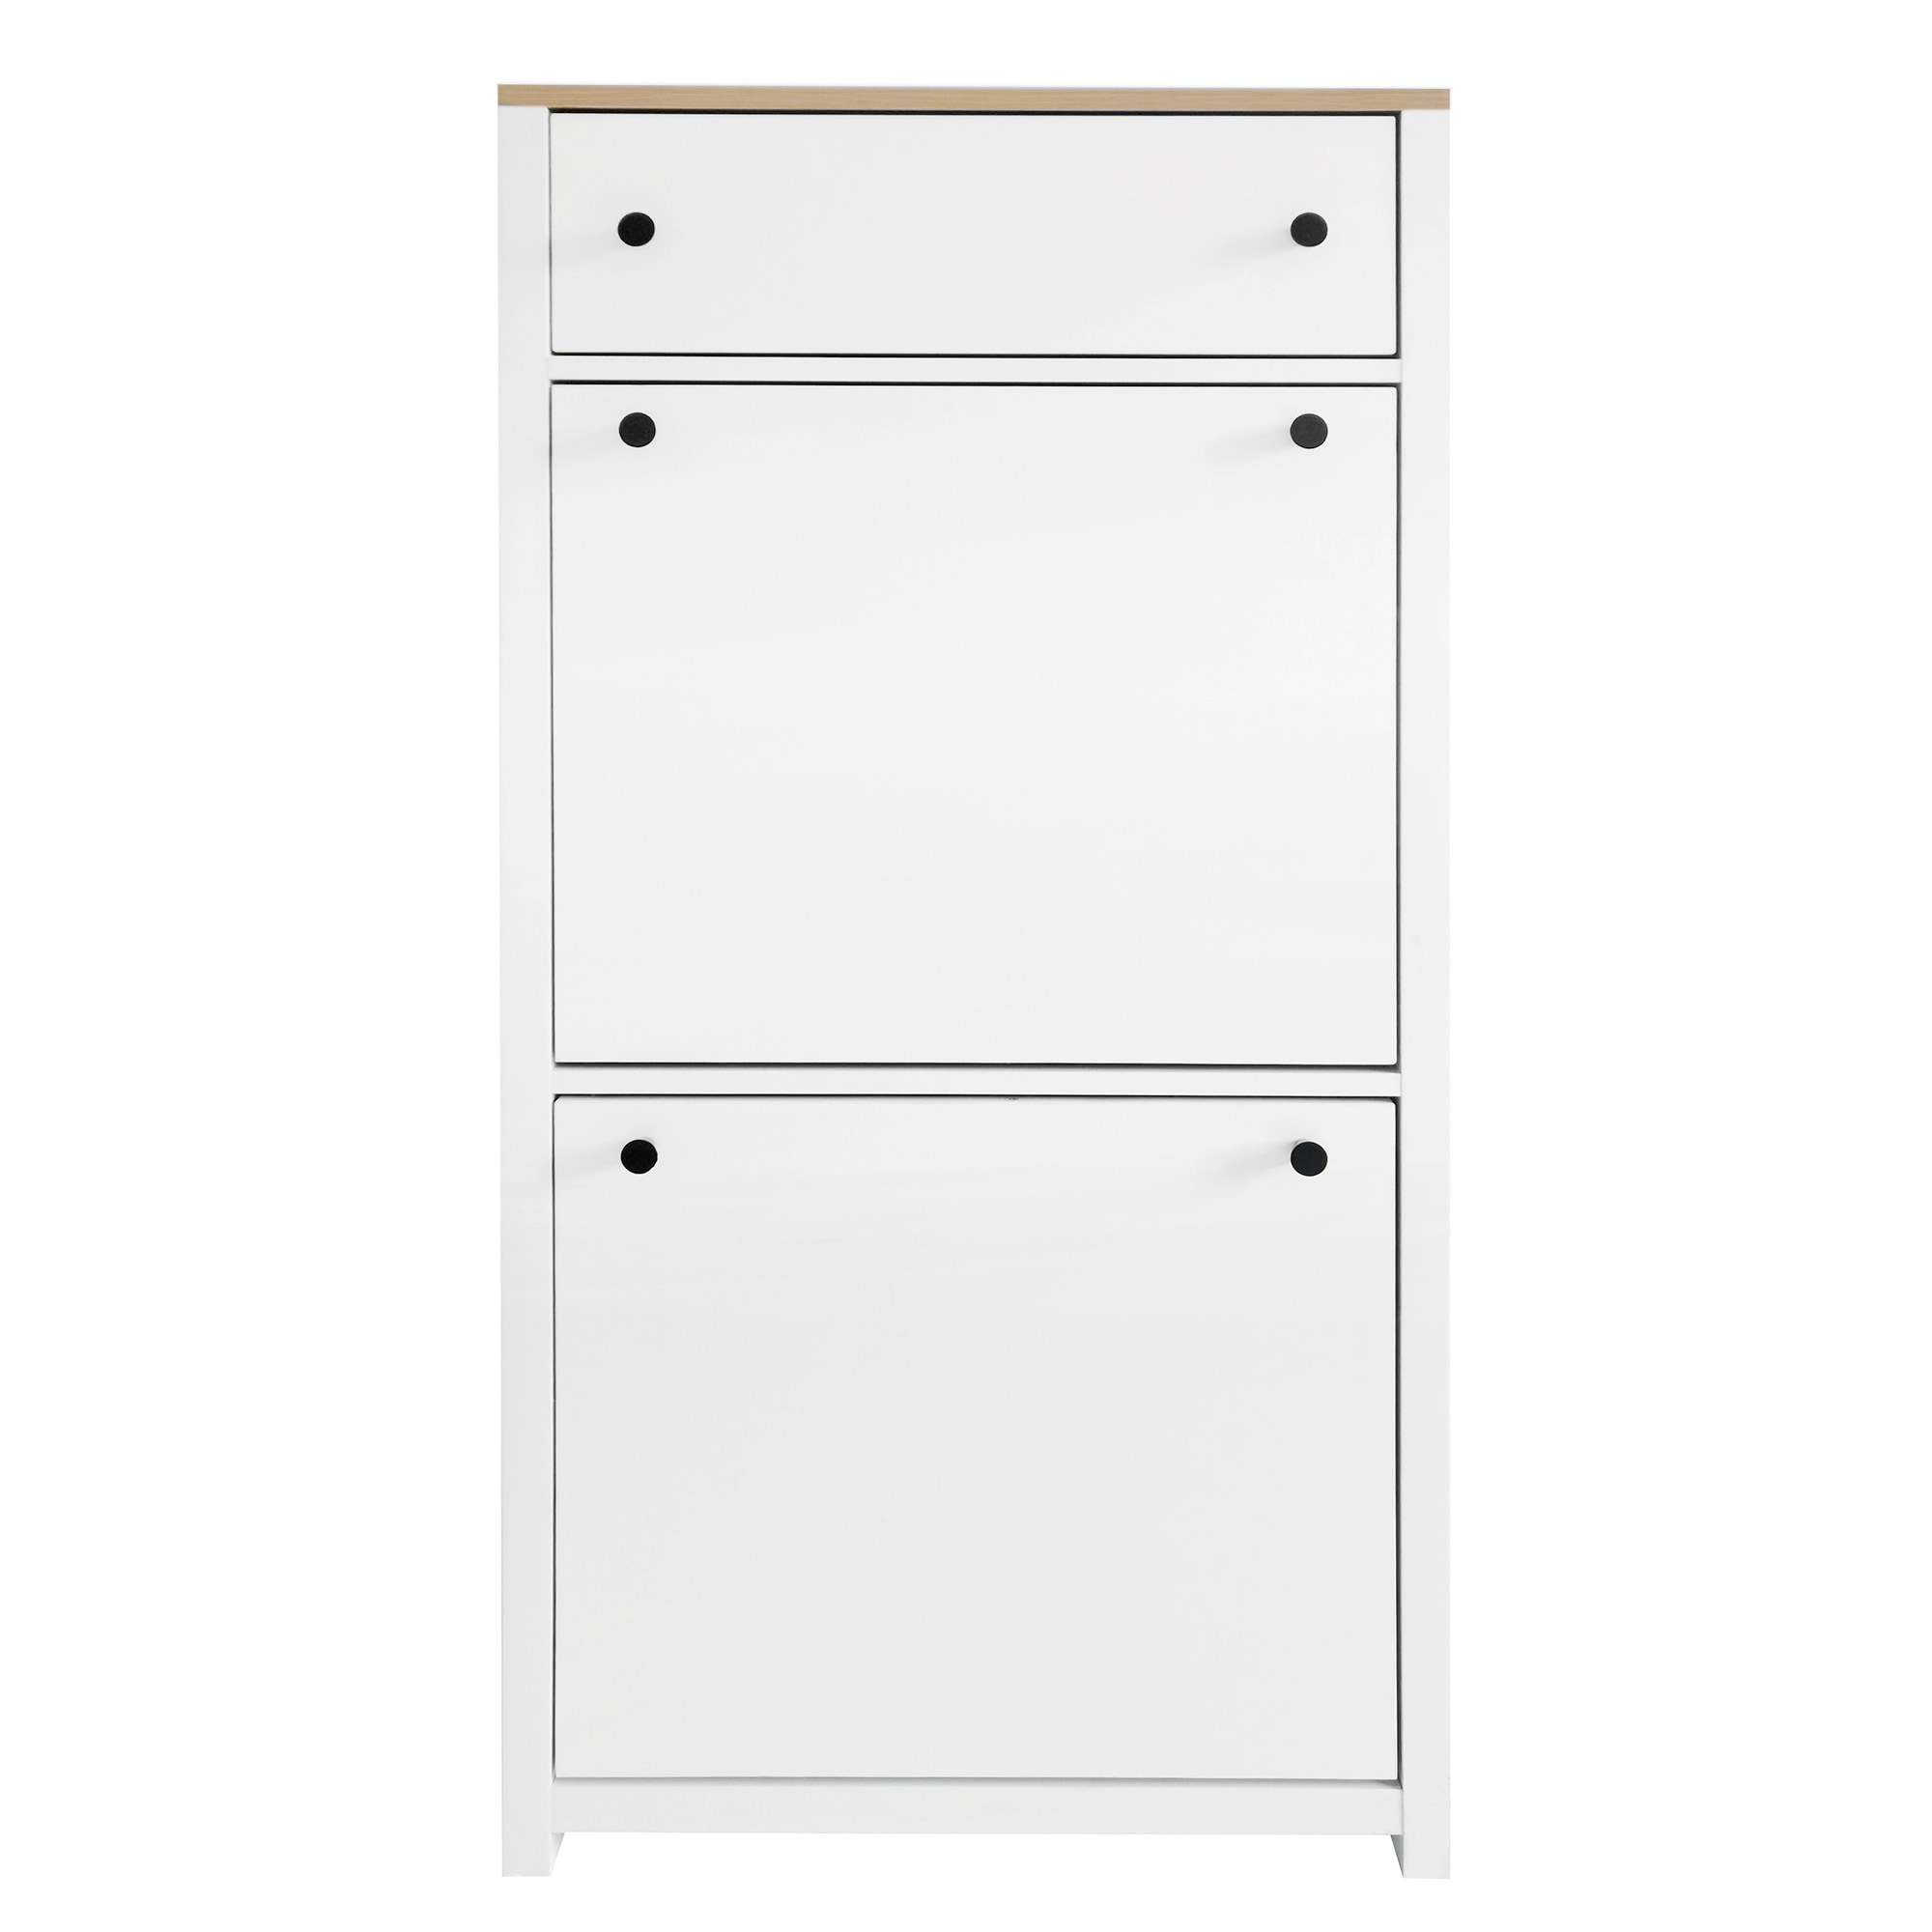 https://ak1.ostkcdn.com/images/products/is/images/direct/617e30d60406980eeb25b770fcfbaba052d40f12/Shoe-Cabinet-with-4-Flip-Drawers%2C-Entryway-Shoe-Storage-Cabinet-with-Adjustable-Panel%2C-Free-Standing-Shoe-Rack-Storage-Organizer.jpg